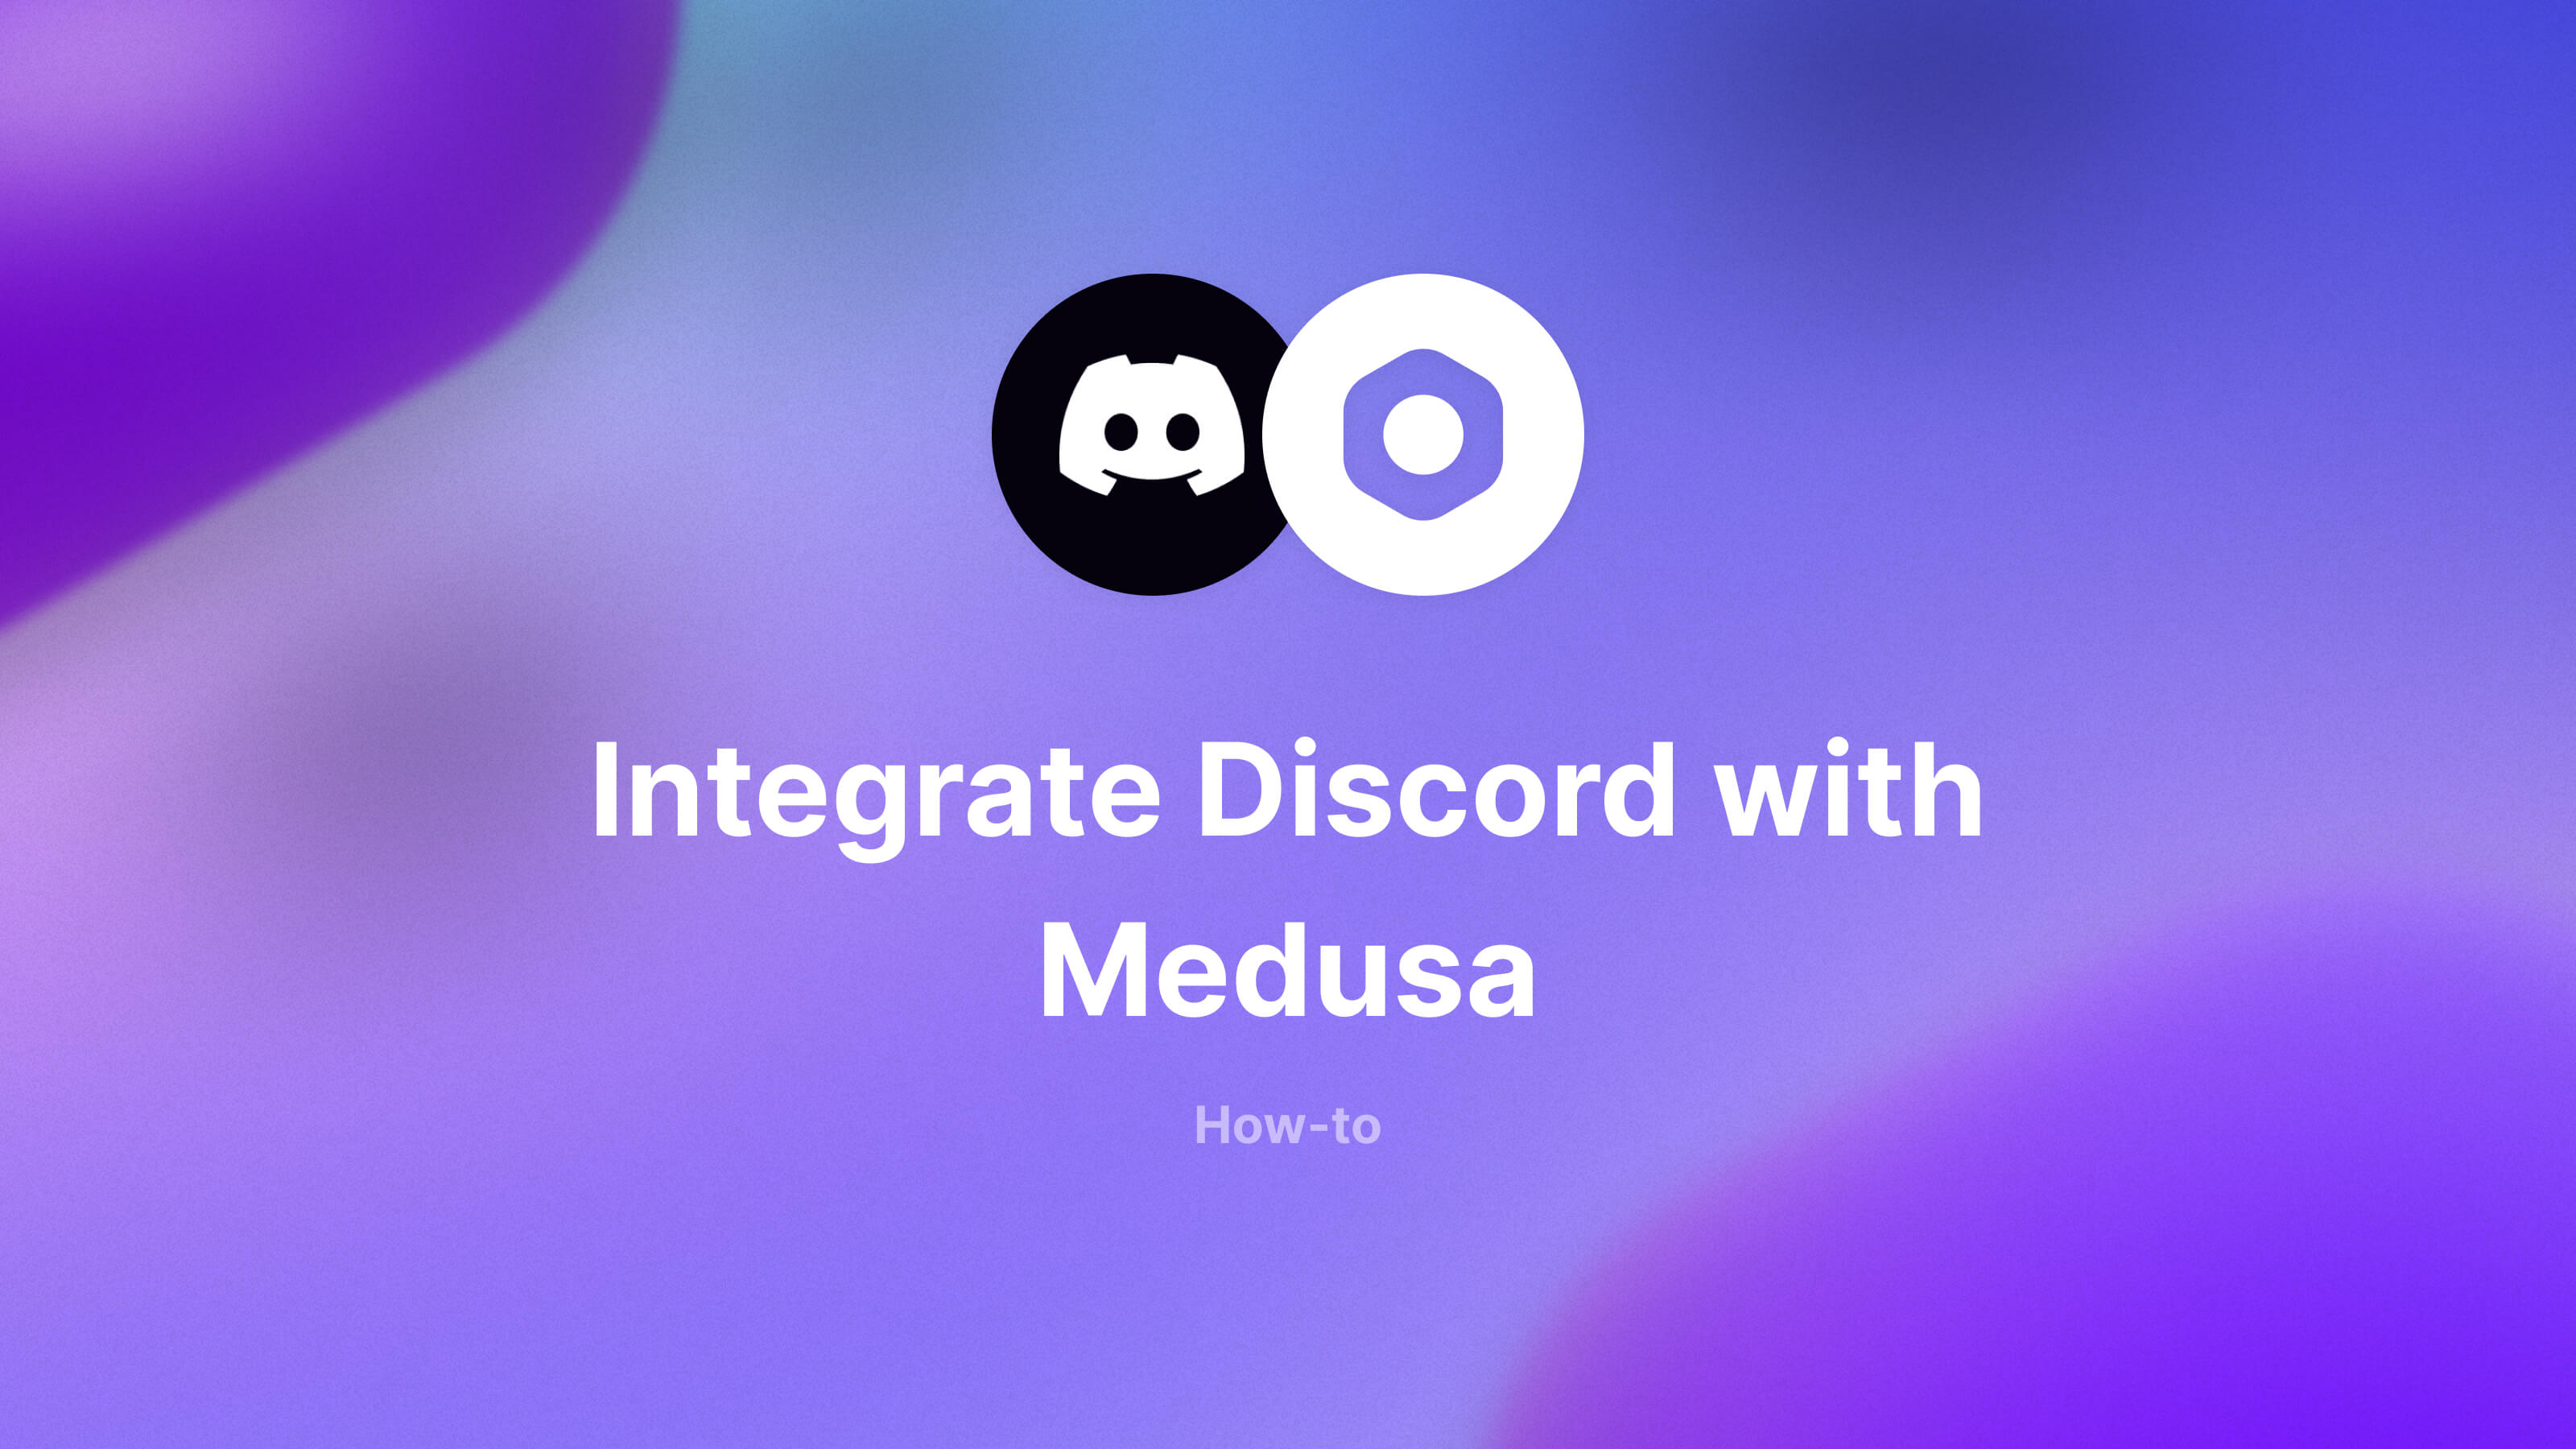 How to Integrate Discord with Medusa for Order Notifications